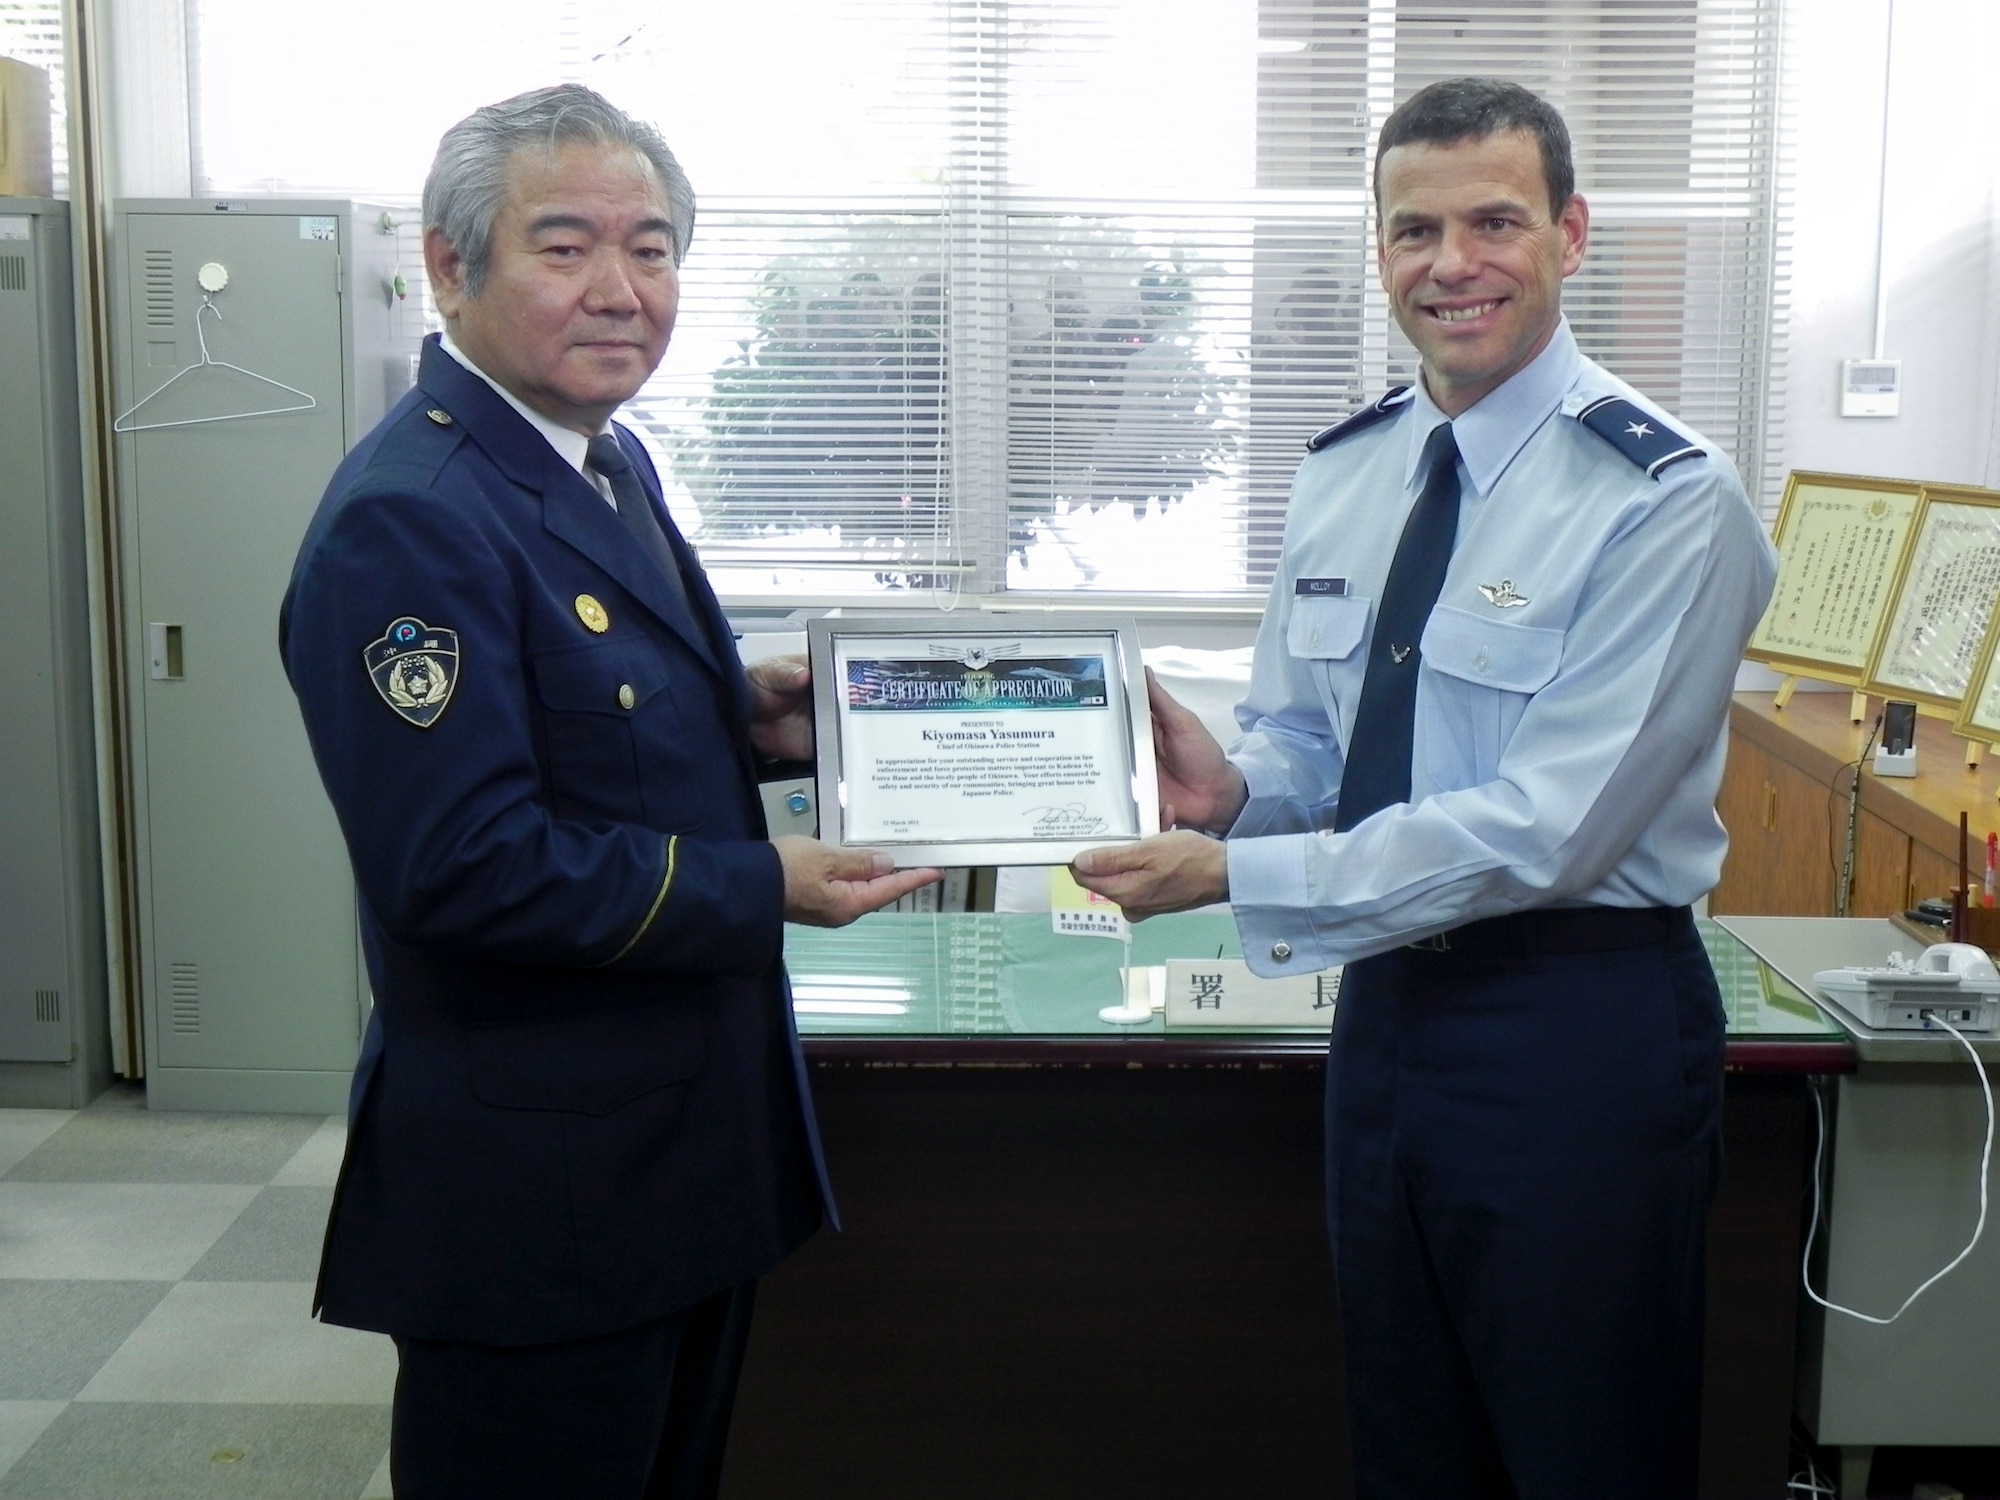 Brig Gen Matt Molloy, 18th Wing commander, presents a certificate of appreciation and a wing coin to Kiyomasa Yasumura, Chief of the Okinawa Police Station during a visit to the station on March 21.  The certificate read, “In appreciation for your outstanding service and cooperation in law enforcement and force protection matters important to Kadena Air Force Base and the lovely people of Okinawa.  Your efforts ensured the safety and security of our communities, bringing great honor to the Japanese Police.”
(U.S. Air Force photo by Maj. Christopher Anderson/Released)